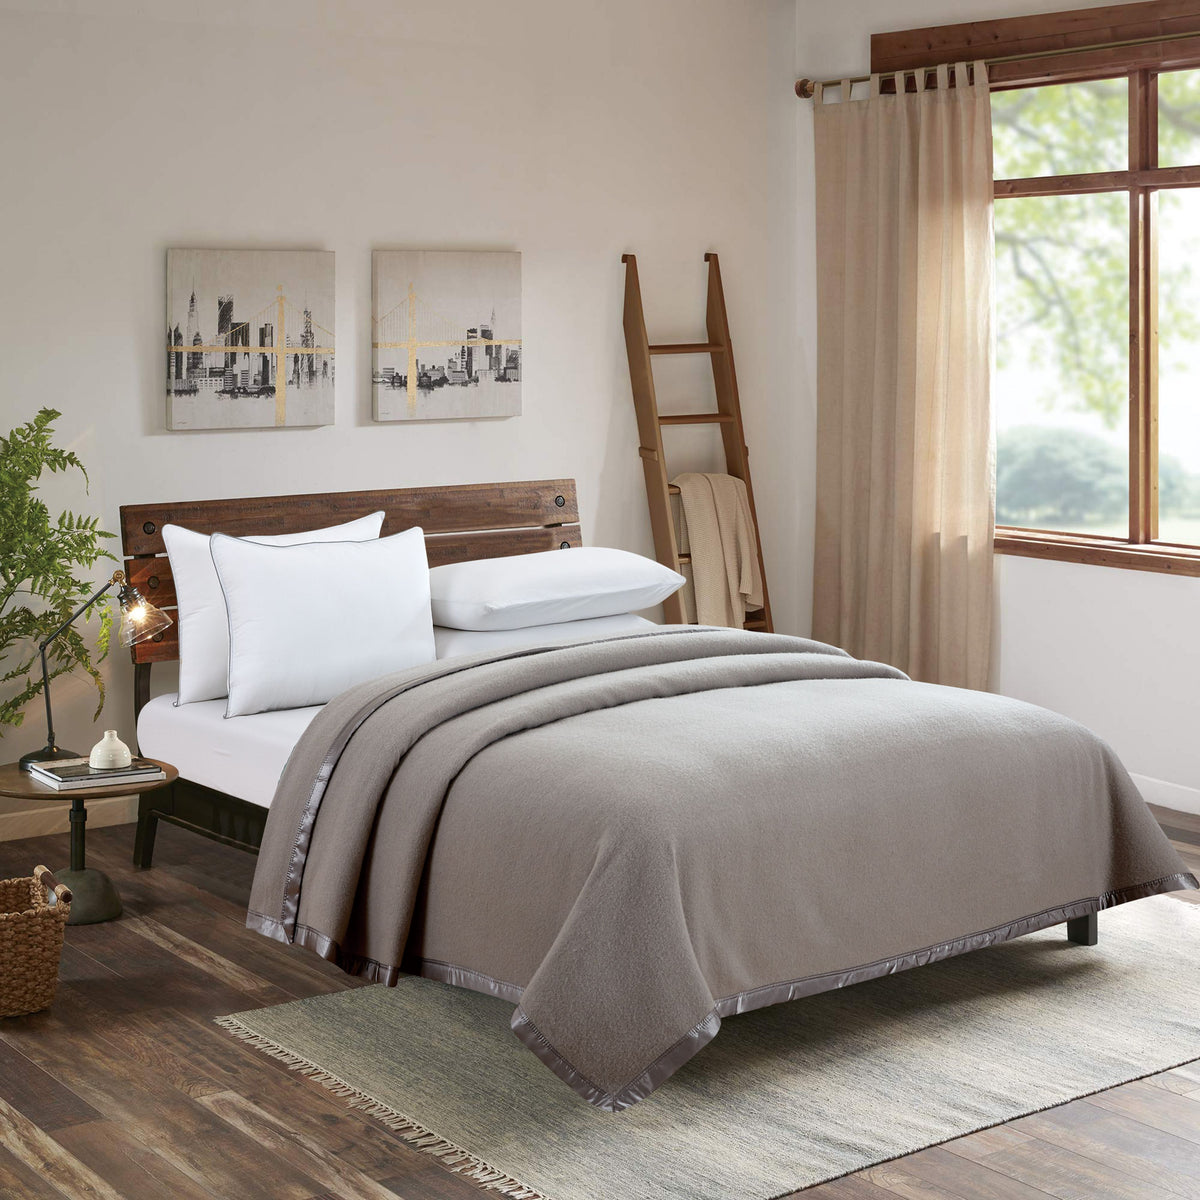 All Products – Laytner's Linen & Home